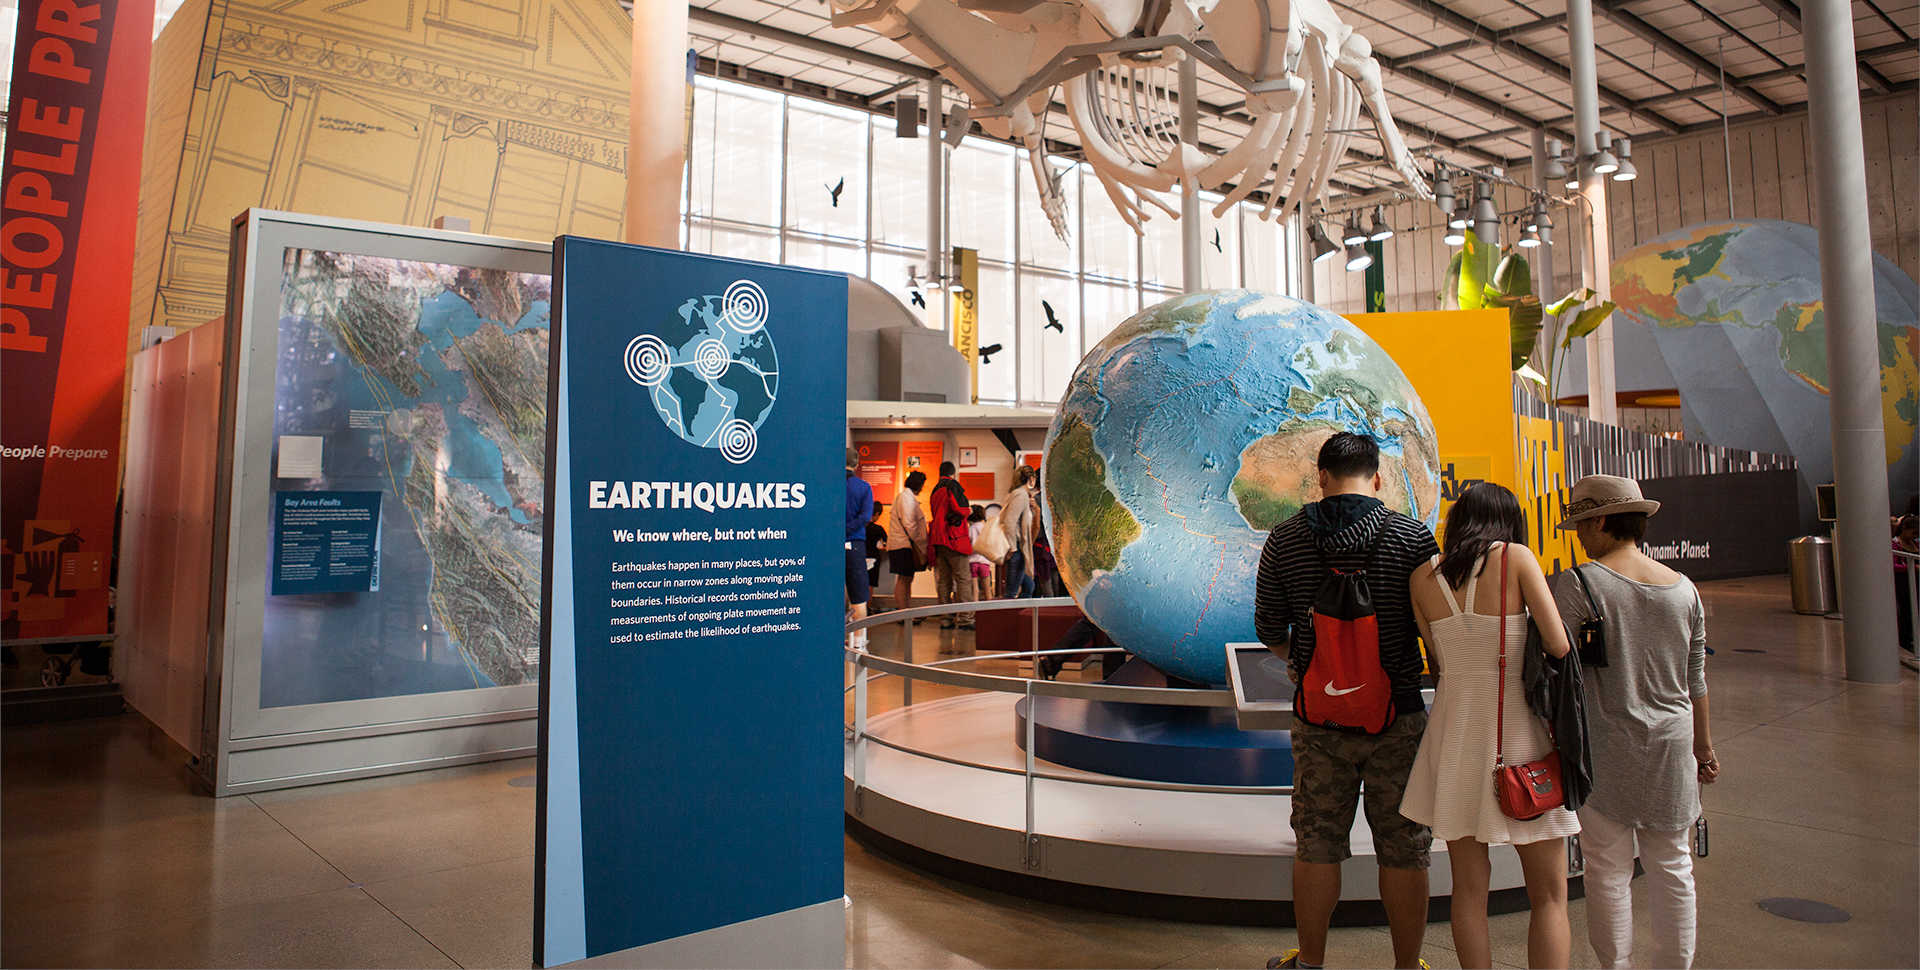 Visitors examine a giant globe at Earthquake, a major exhibit at the California Academy of Sciences